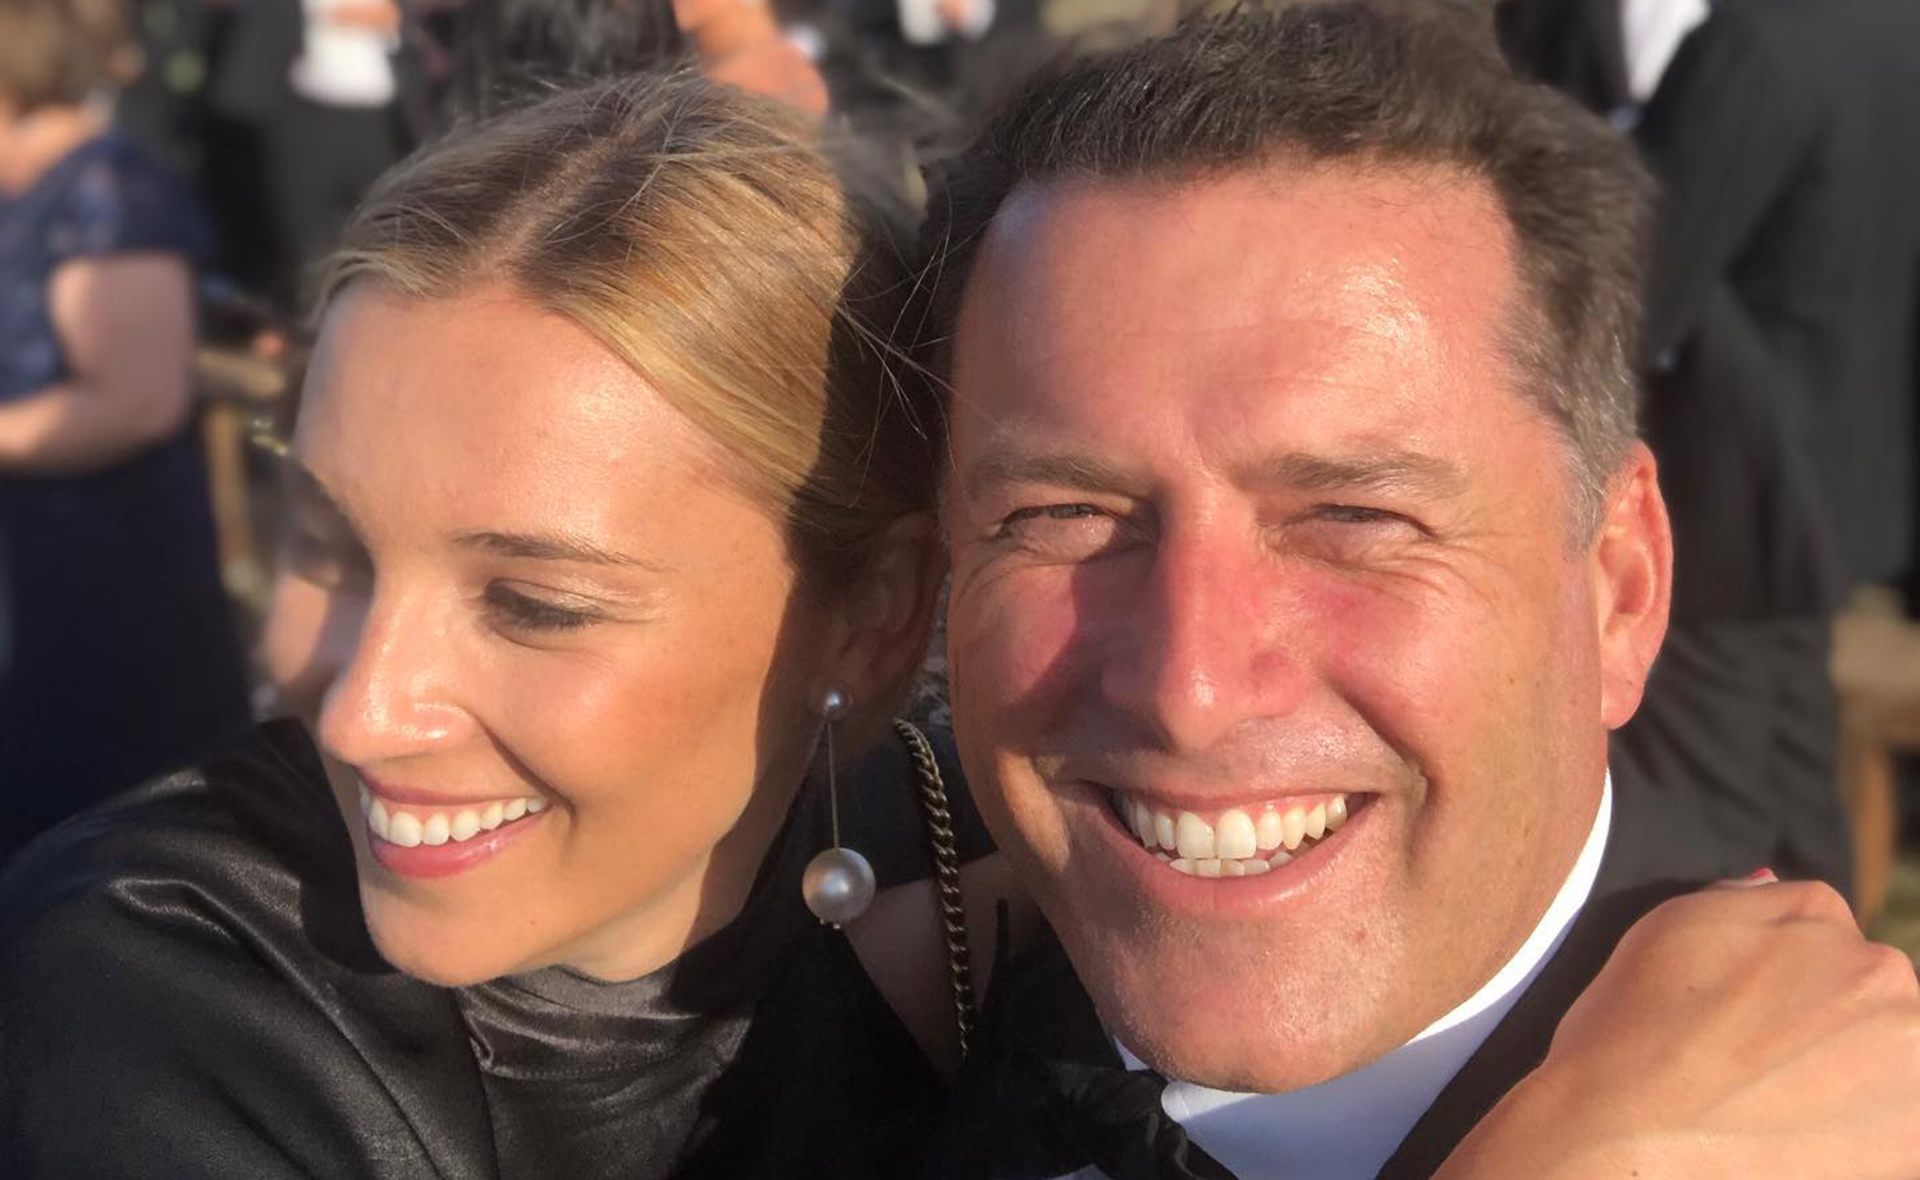 EXCLUSIVE: Is Karl Stefanovic ready to leave the Today Show behind and focus on family?